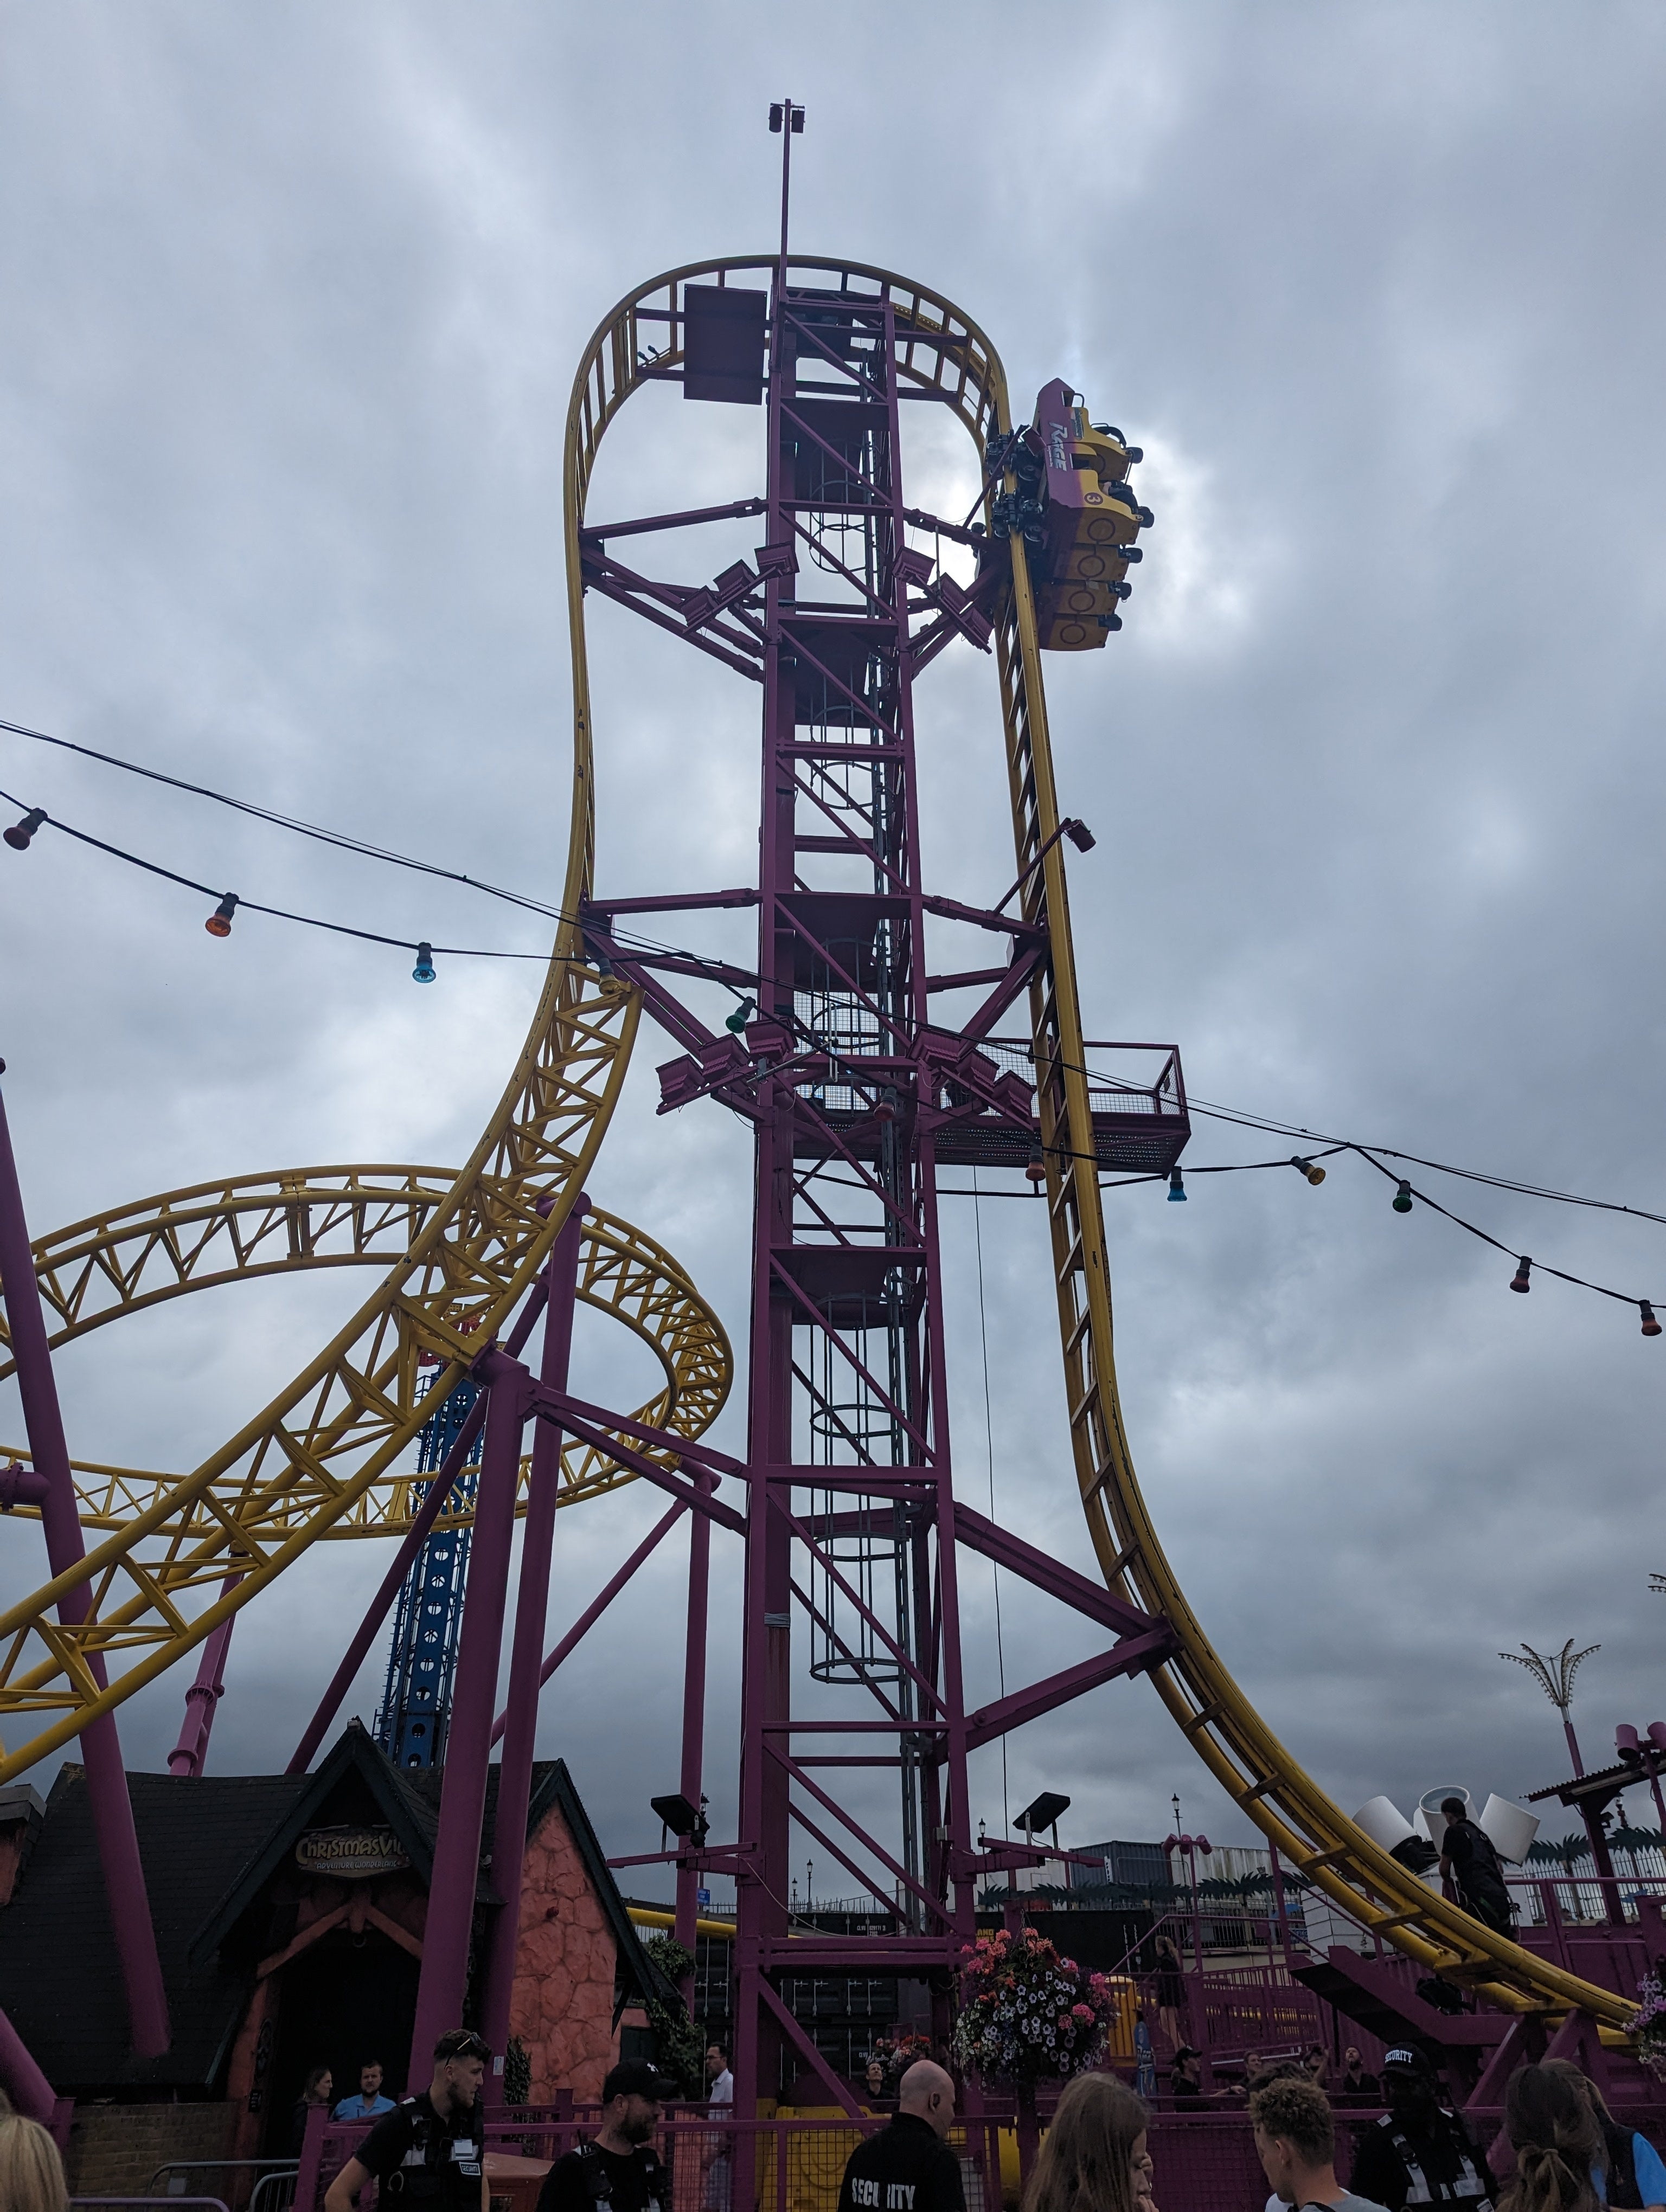 A 72-foot high rollercoaster broke down leaving its riders suspended vertically in the air for up to 40 minutes in Essex on Friday